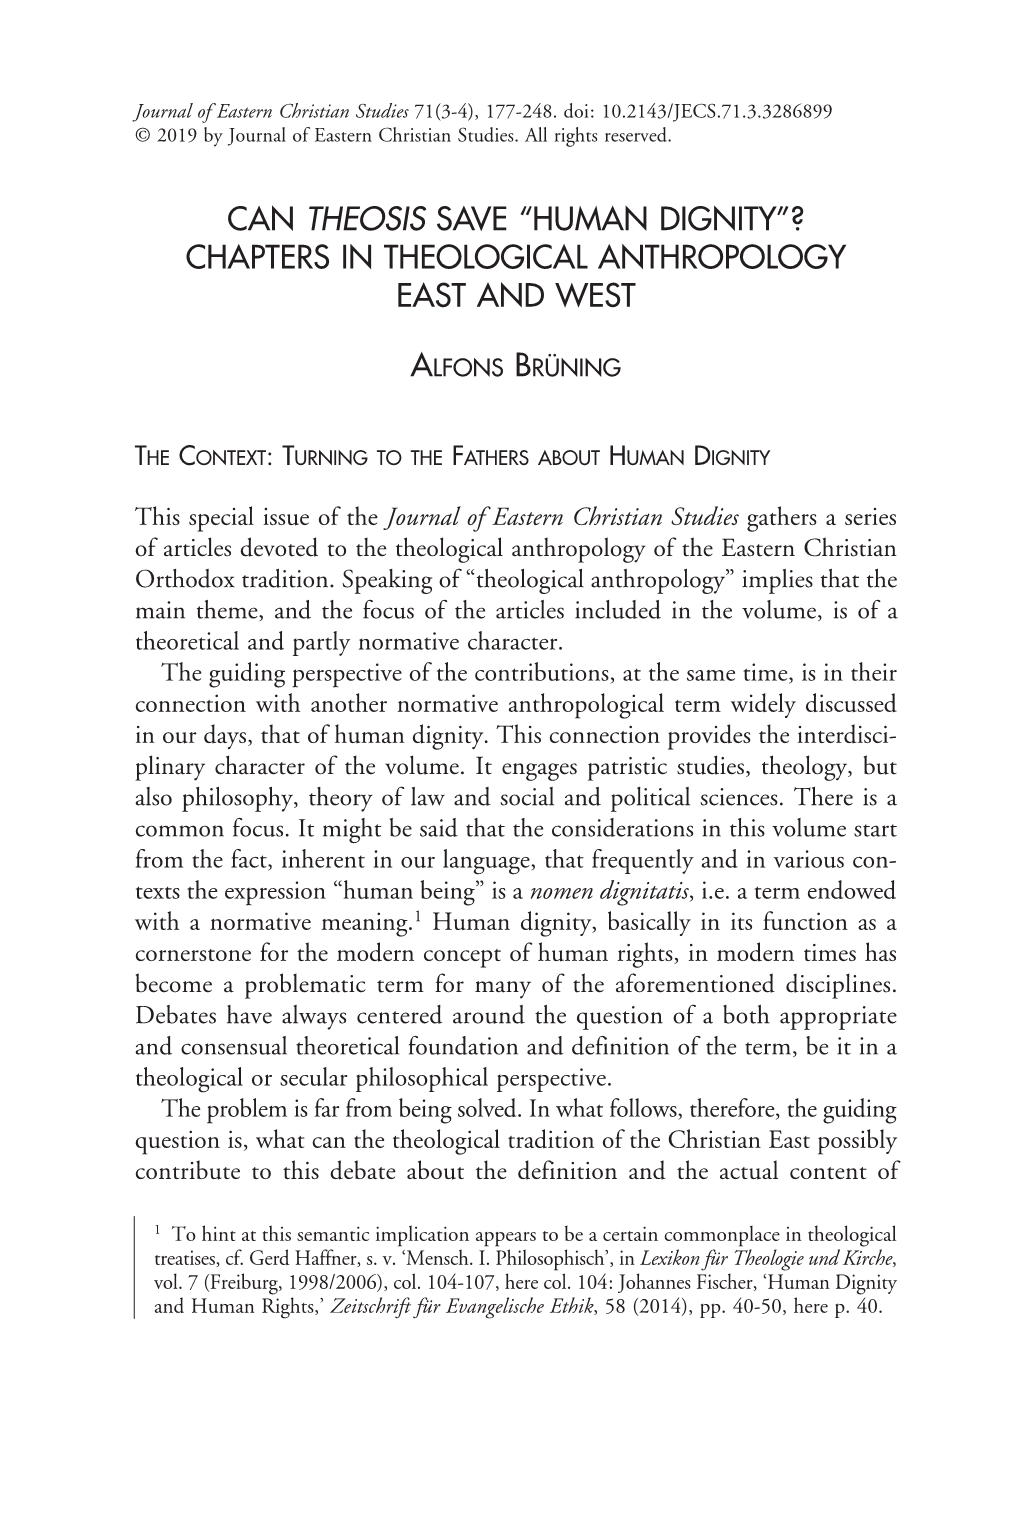 Can Theosis Save “Human Dignity”? Chapters in Theological Anthropology East and West